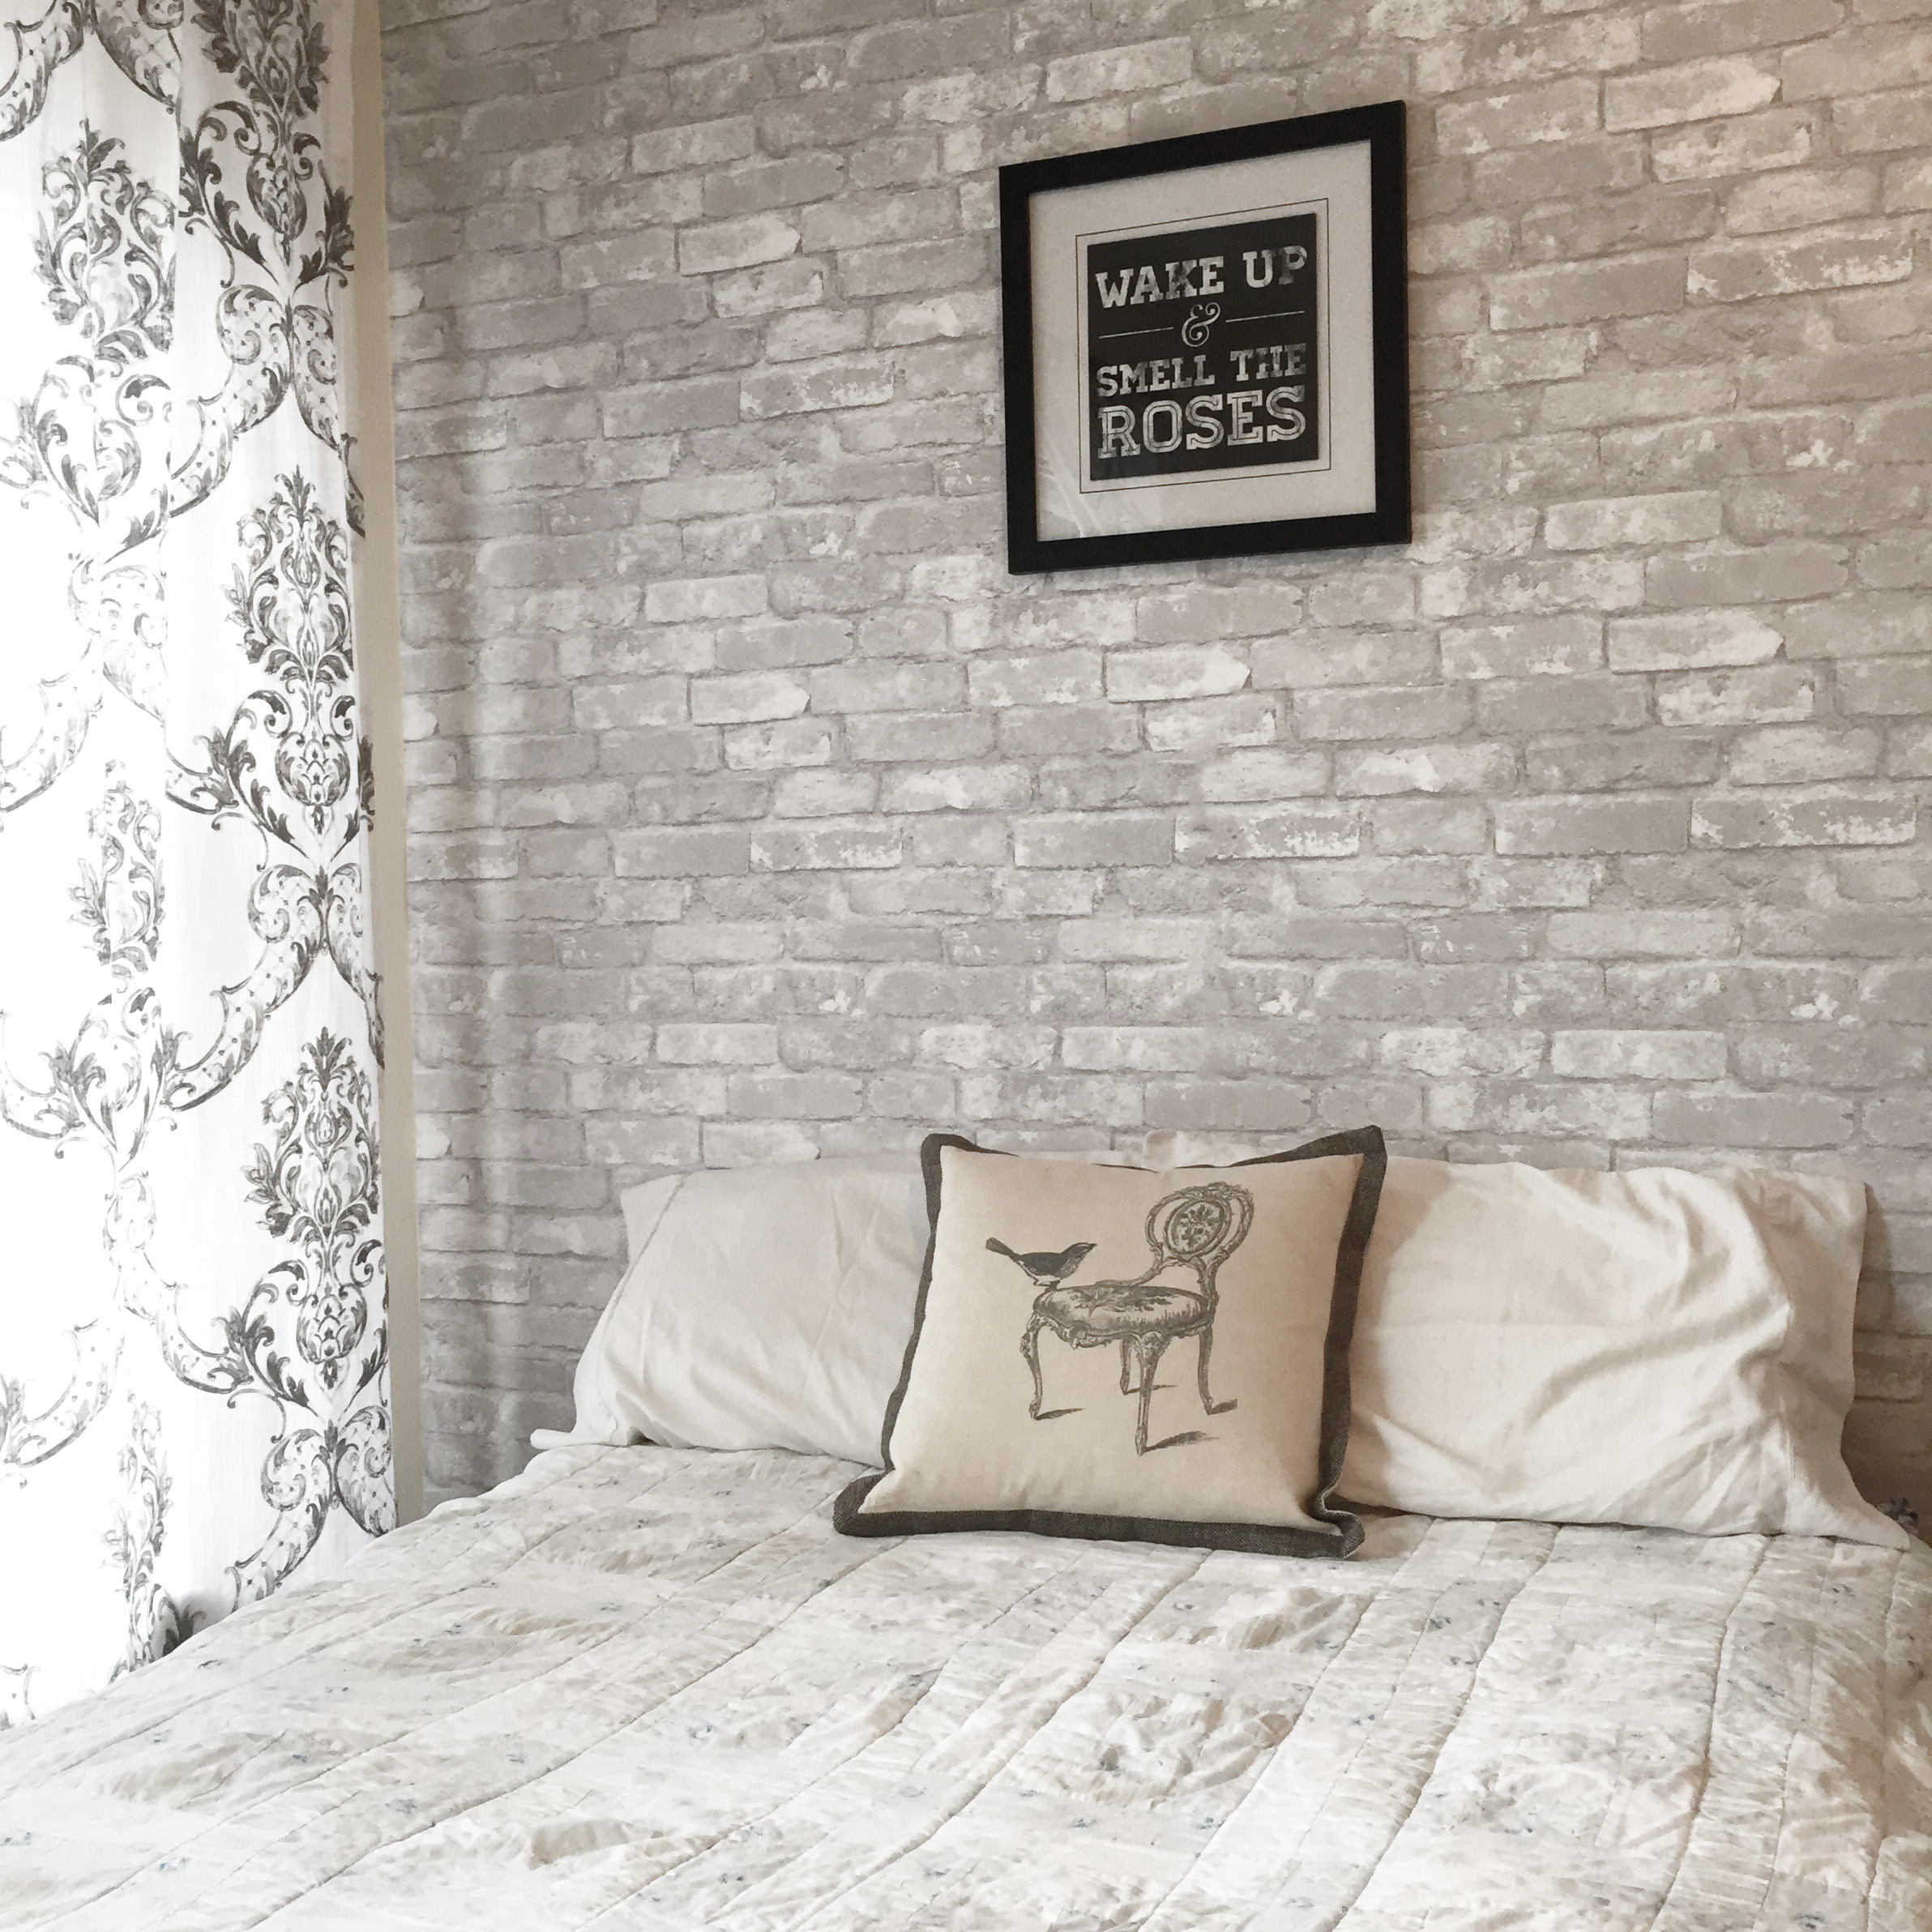 Faux brick wall in a French Country bedroom